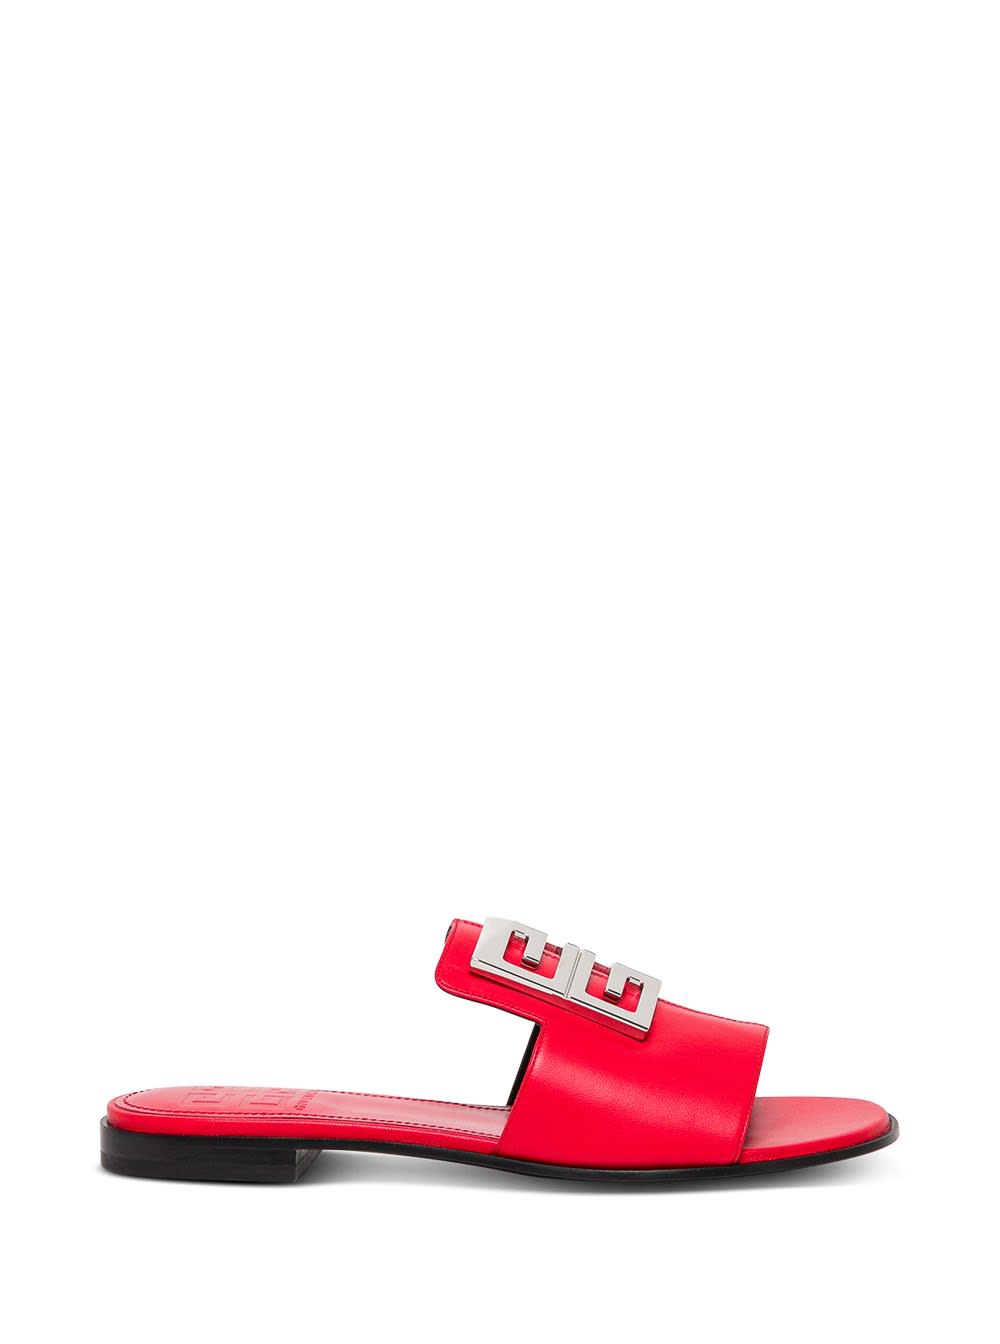 Buy Givenchy 4g Flat Sandals In Red Leather online, shop Givenchy shoes with free shipping